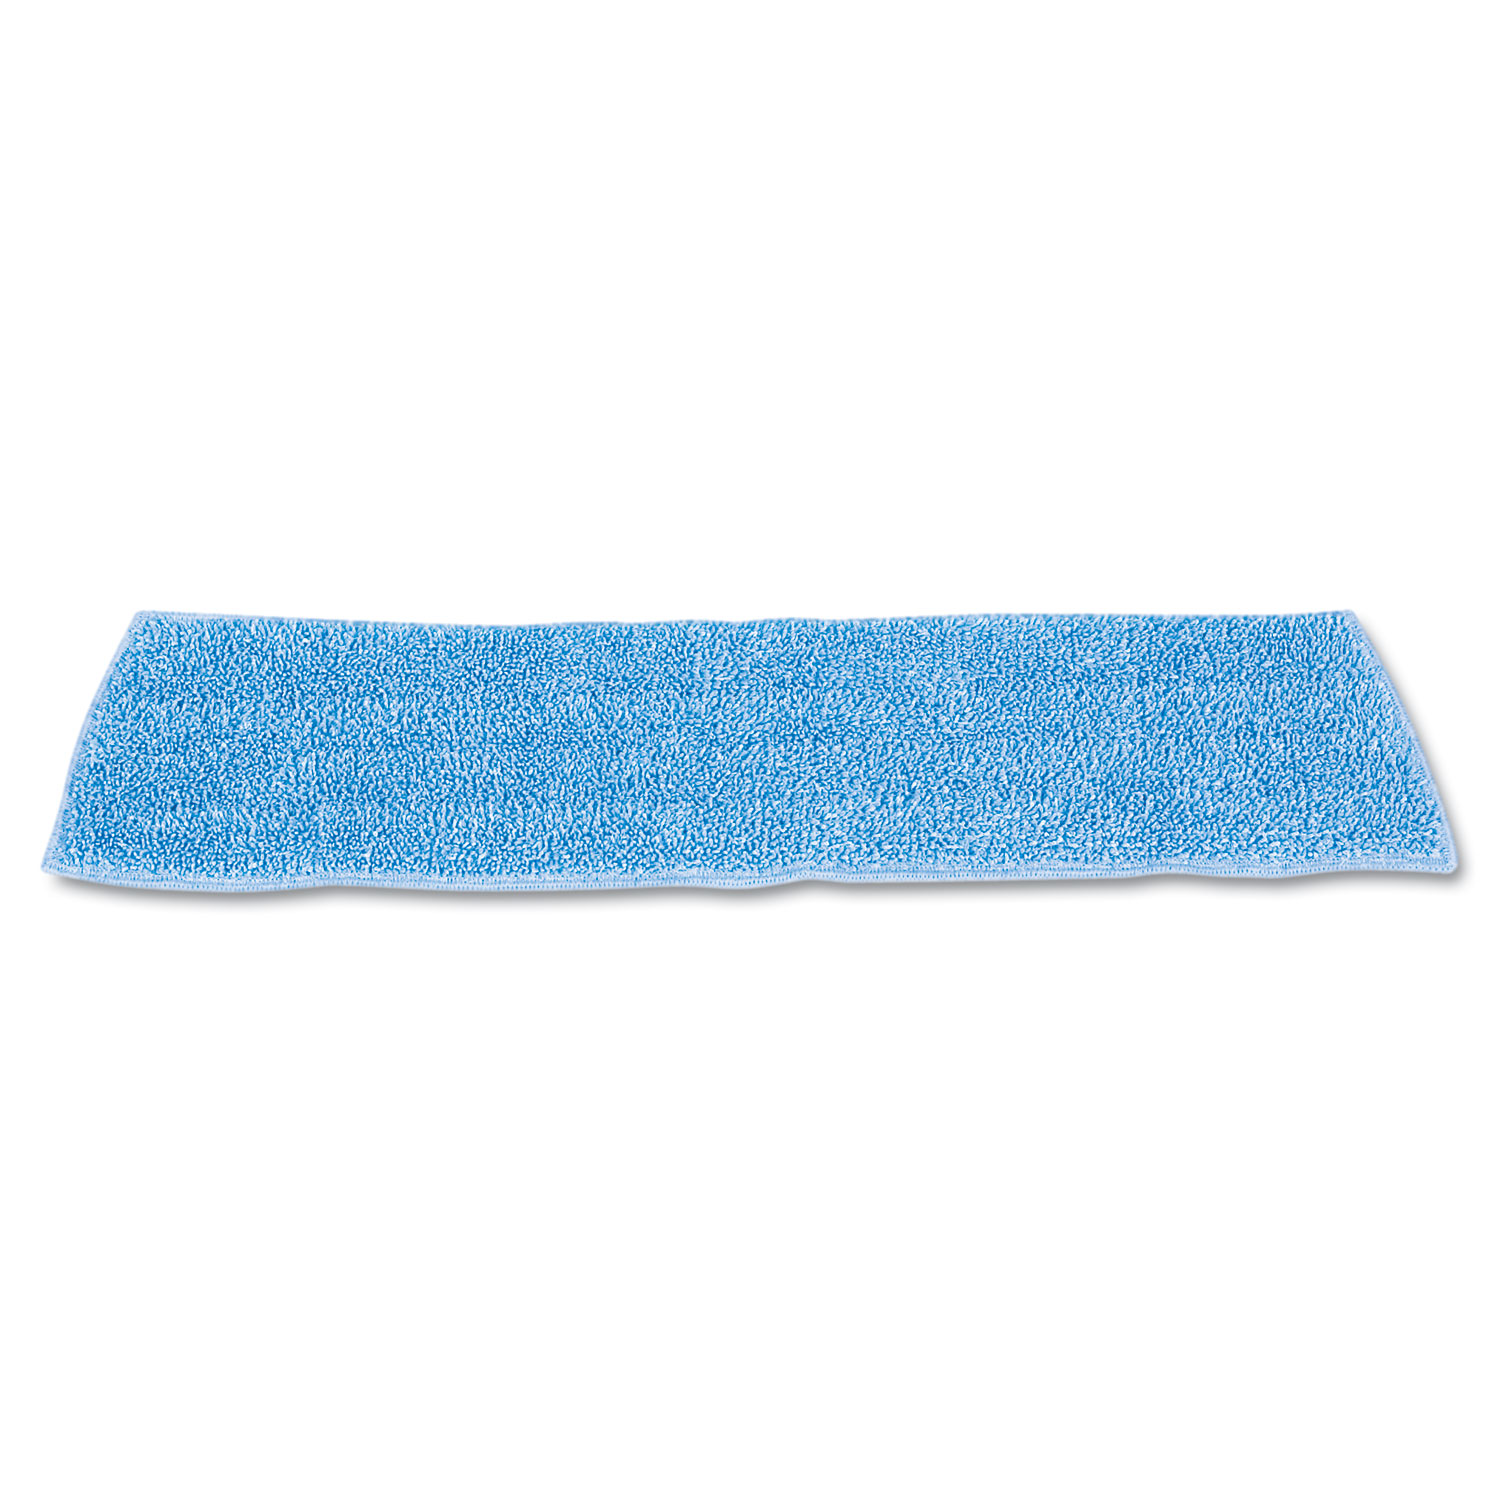  Rubbermaid Commercial FGQ40900BL00 Economy Wet Mopping Pad, Microfiber, 18, Blue (RCPQ409BLUCT) 